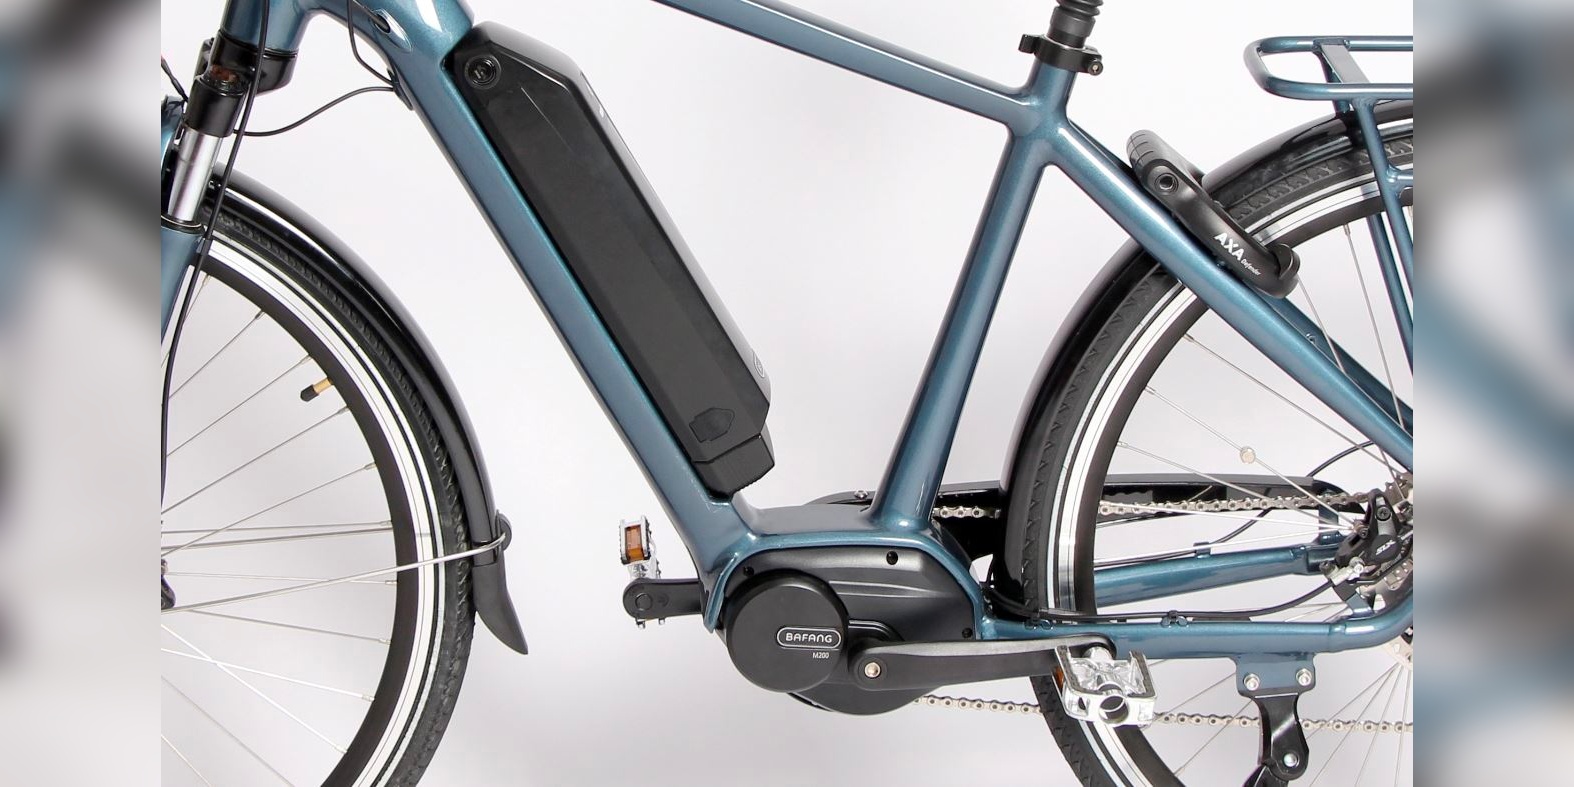 Bafang M200 is a new mid-drive motor that could help drop e0bike prices